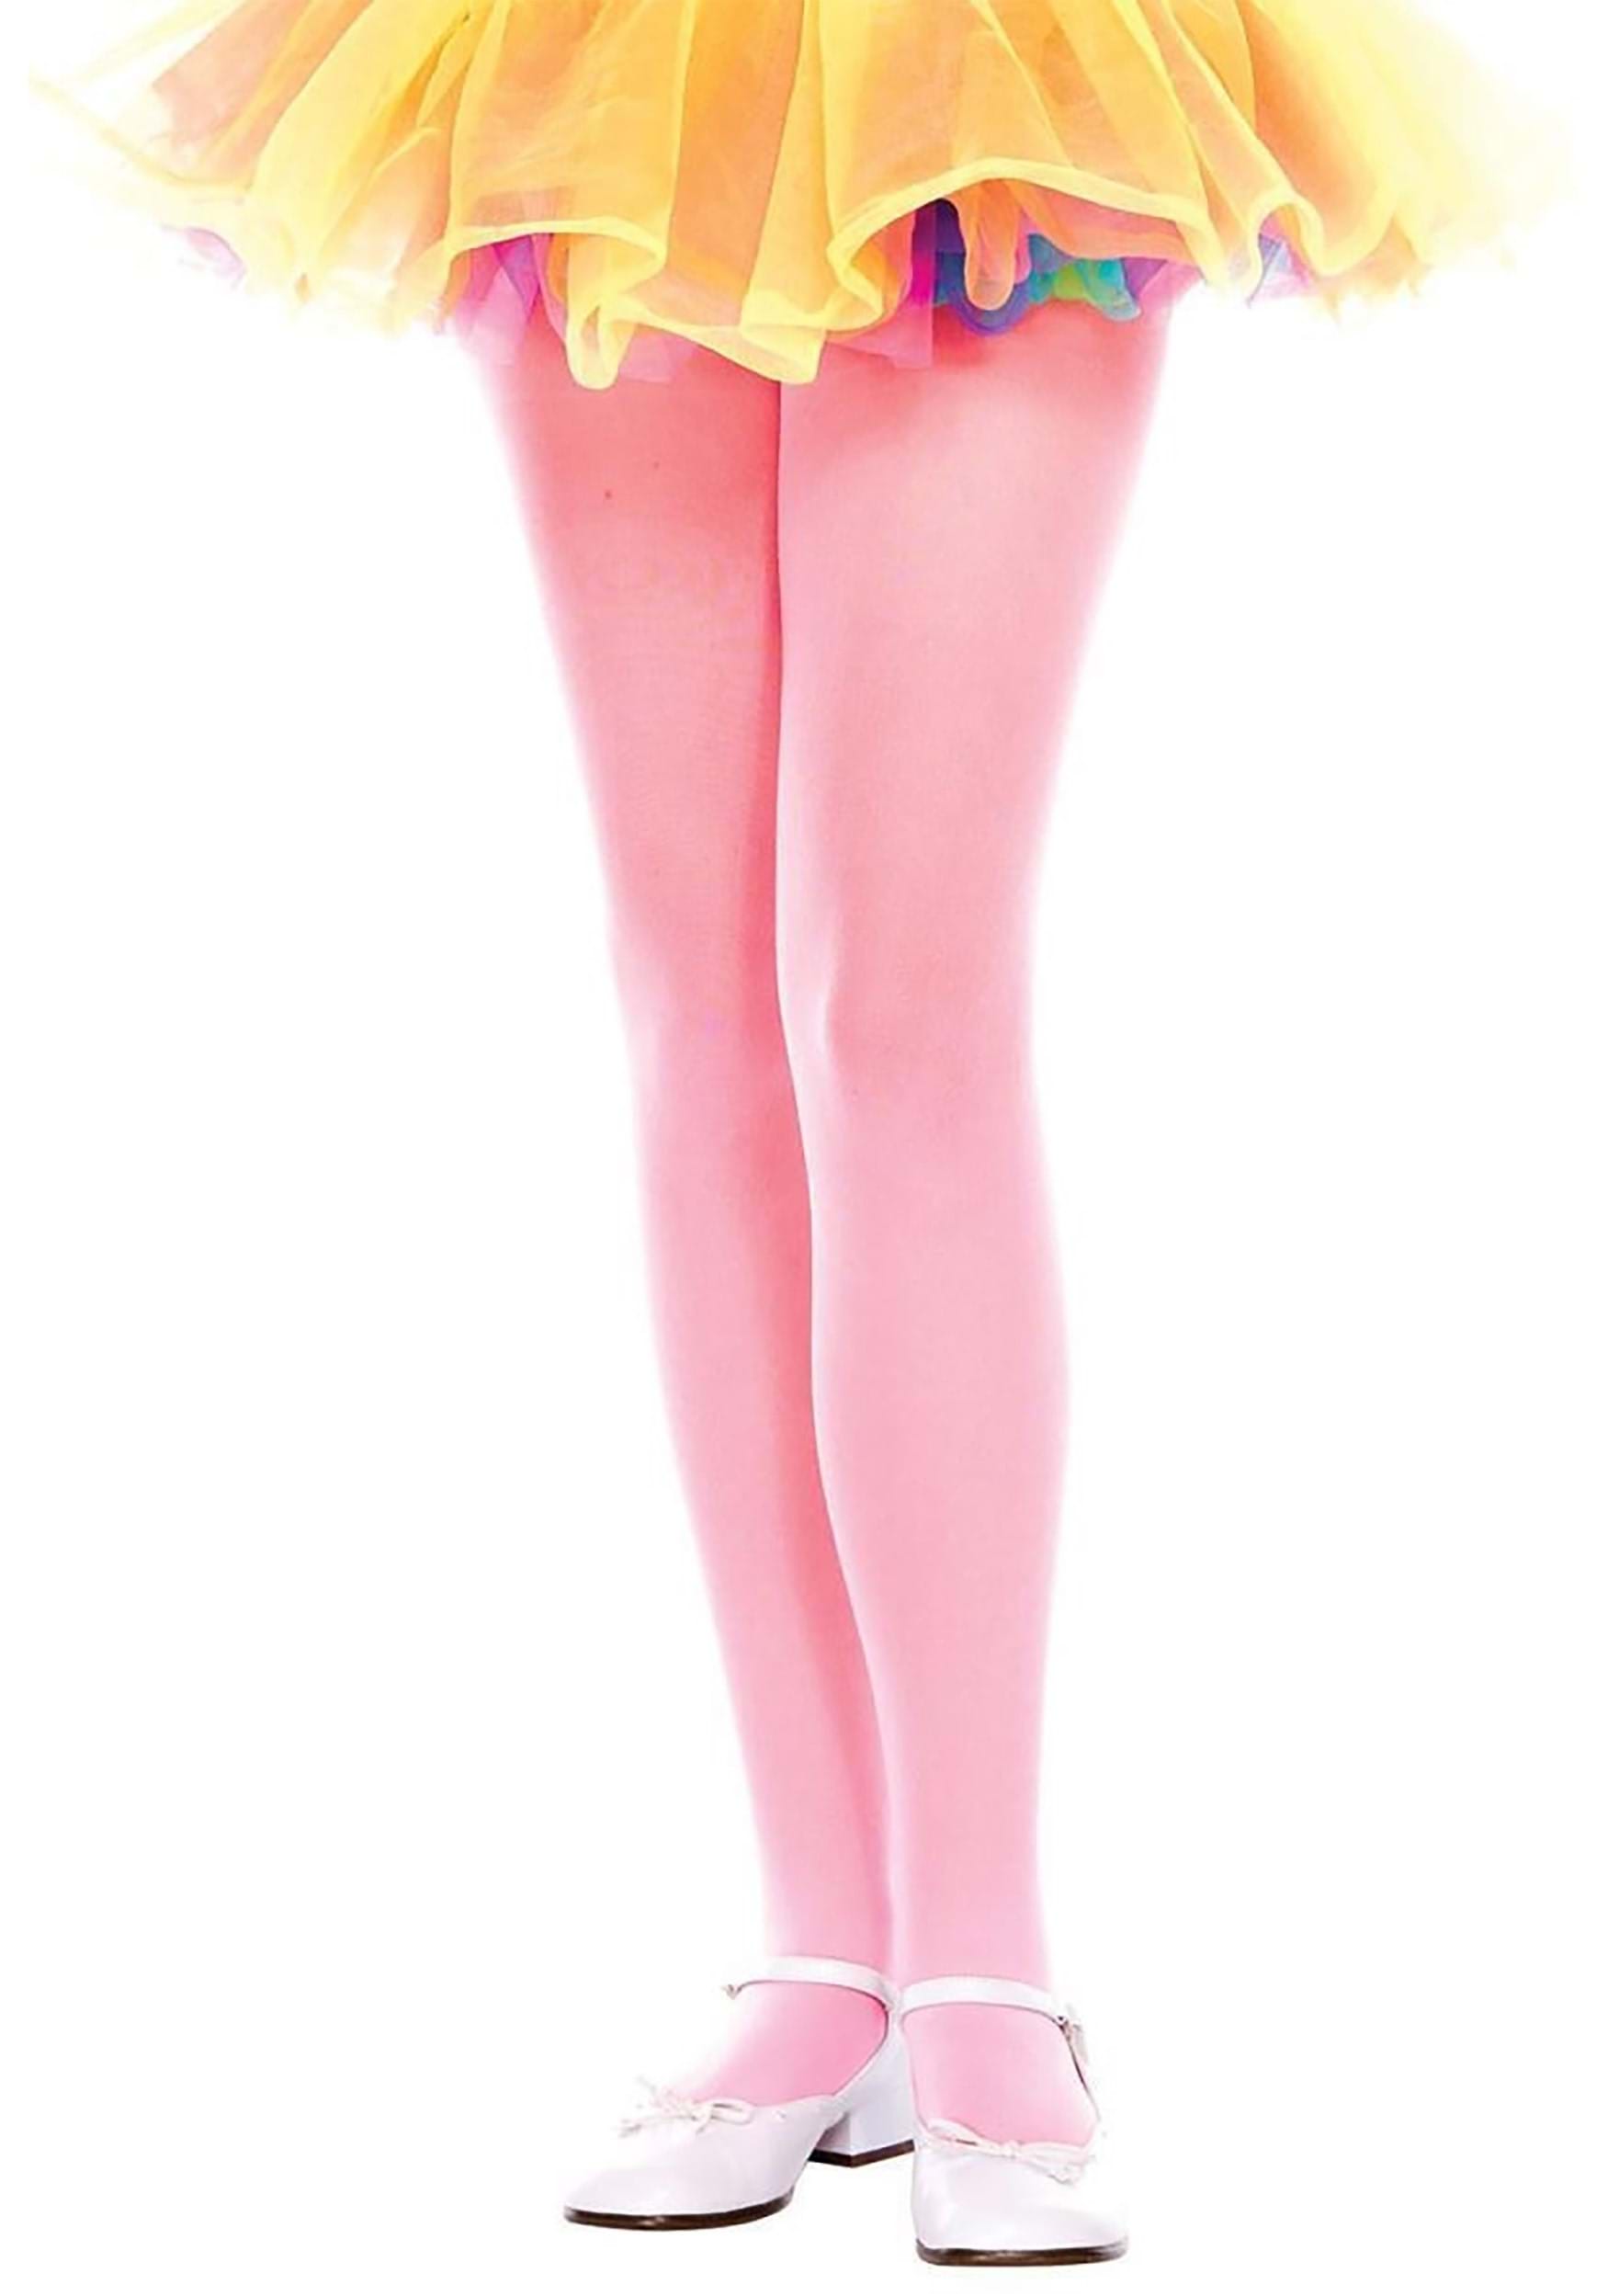 https://images.halloweencostumes.ca/products/93457/1-1/kids-light-pink-opaque-tights.jpg